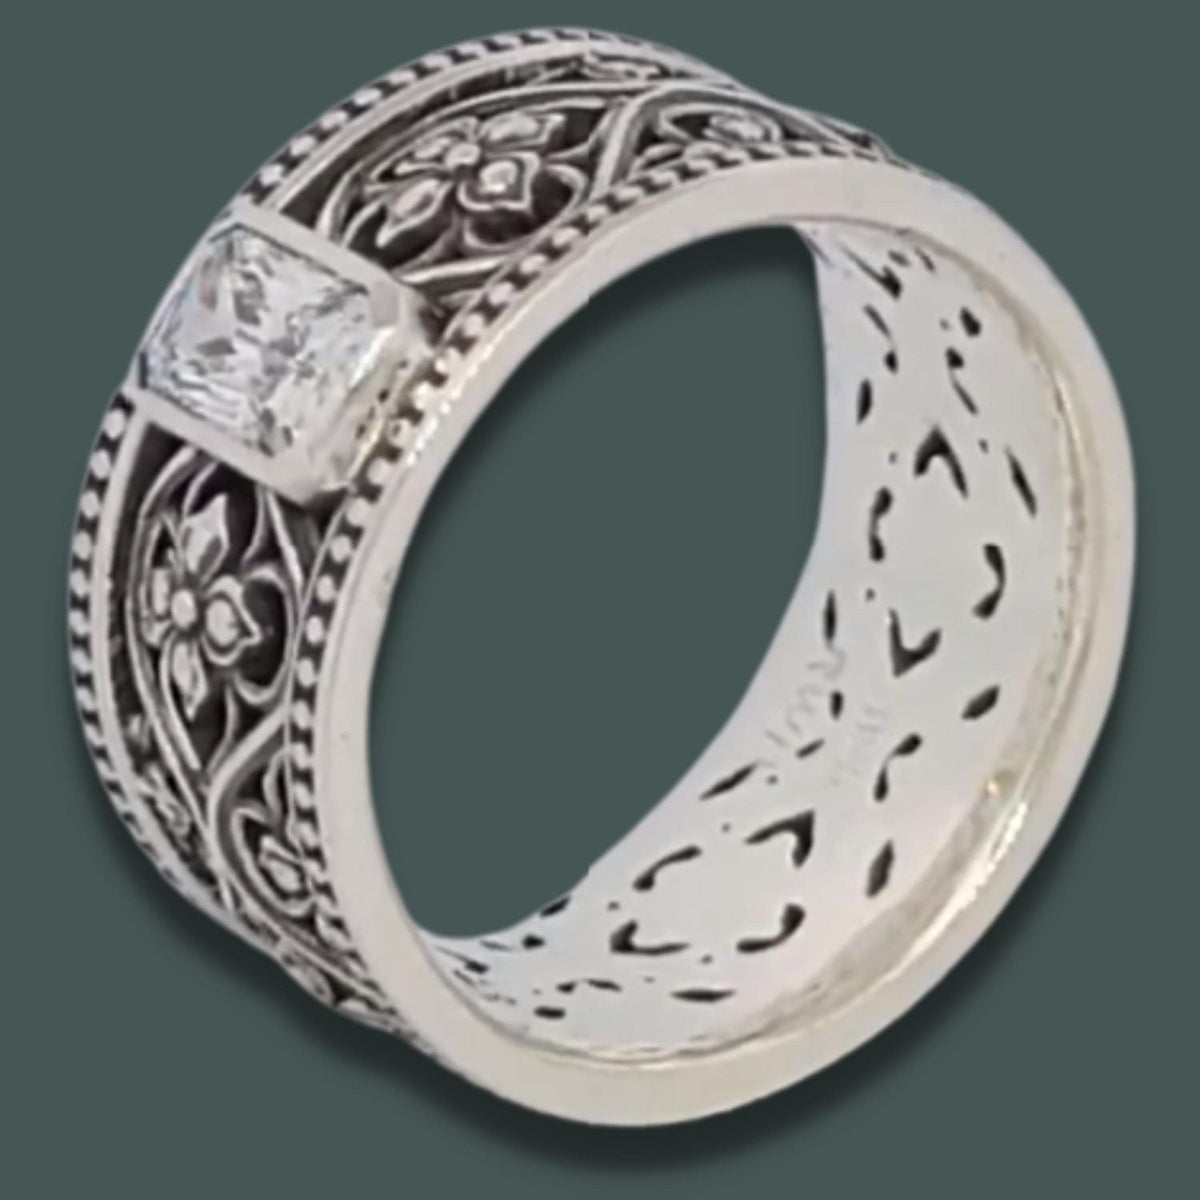 VALENCIA SOLITAIRE Band Ring in SILVER with CHOICE OF 5mm GEMSTONE - Starting at $249 - Celtic Jewelscapes